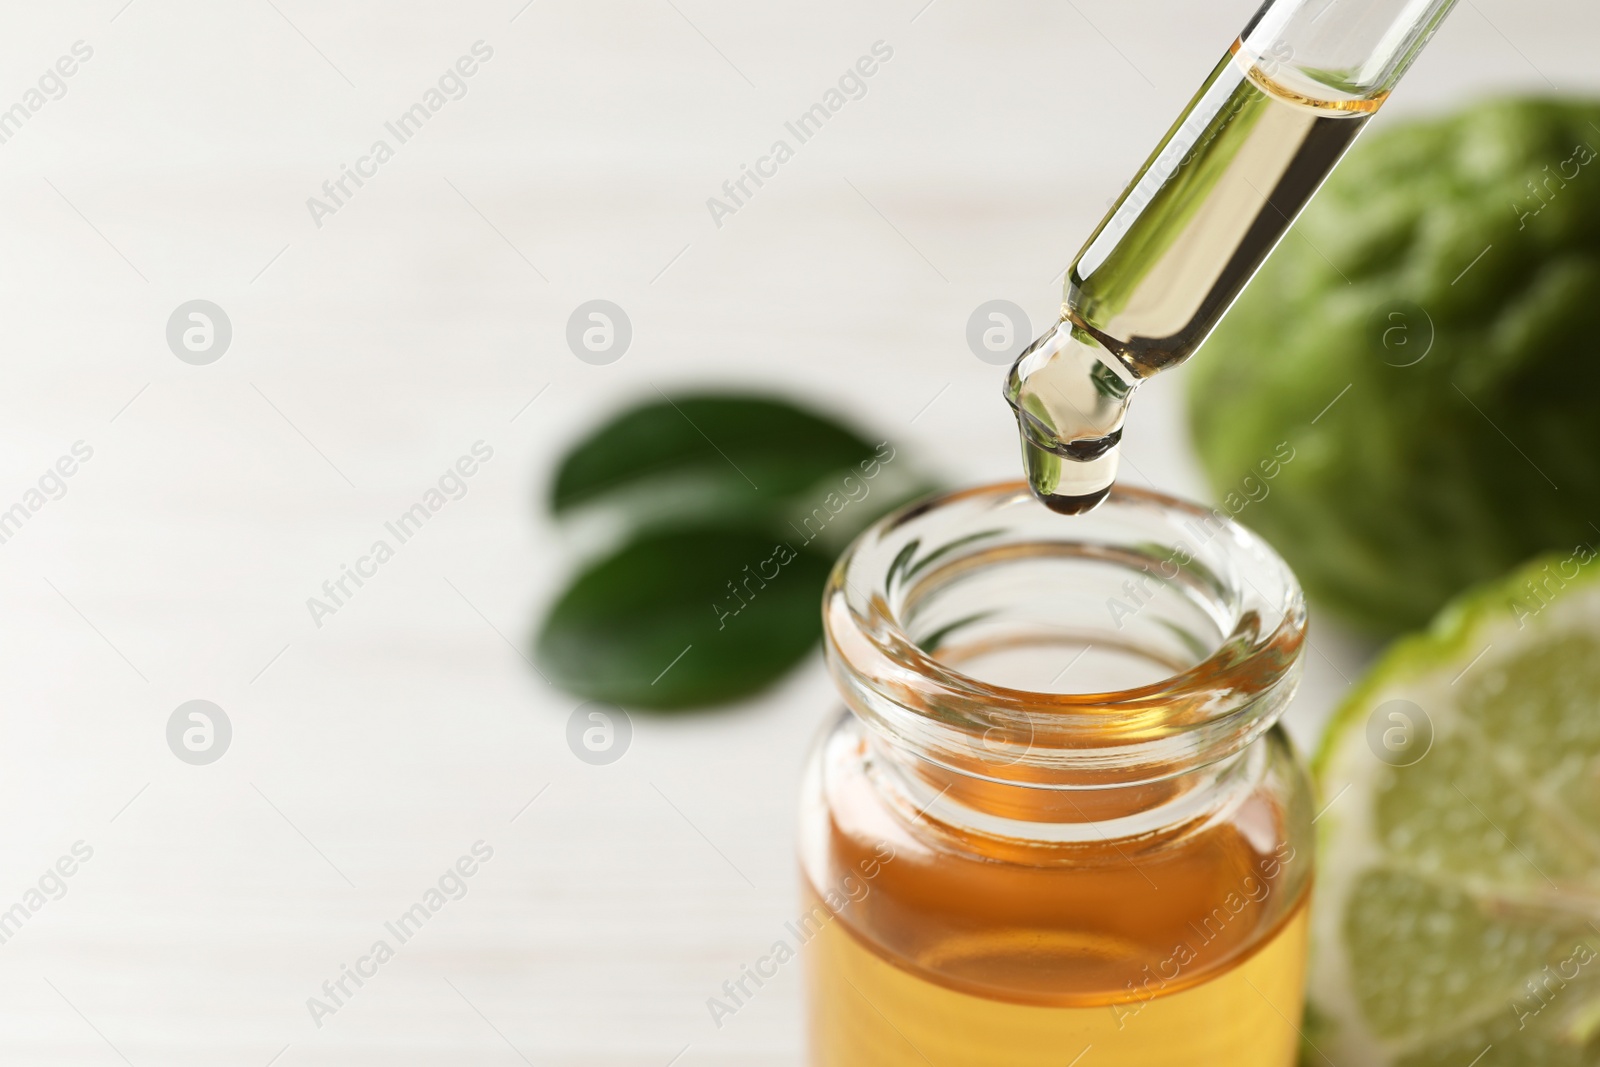 Photo of Dripping bergamot essential oil into glass bottle on table, closeup. Space for text